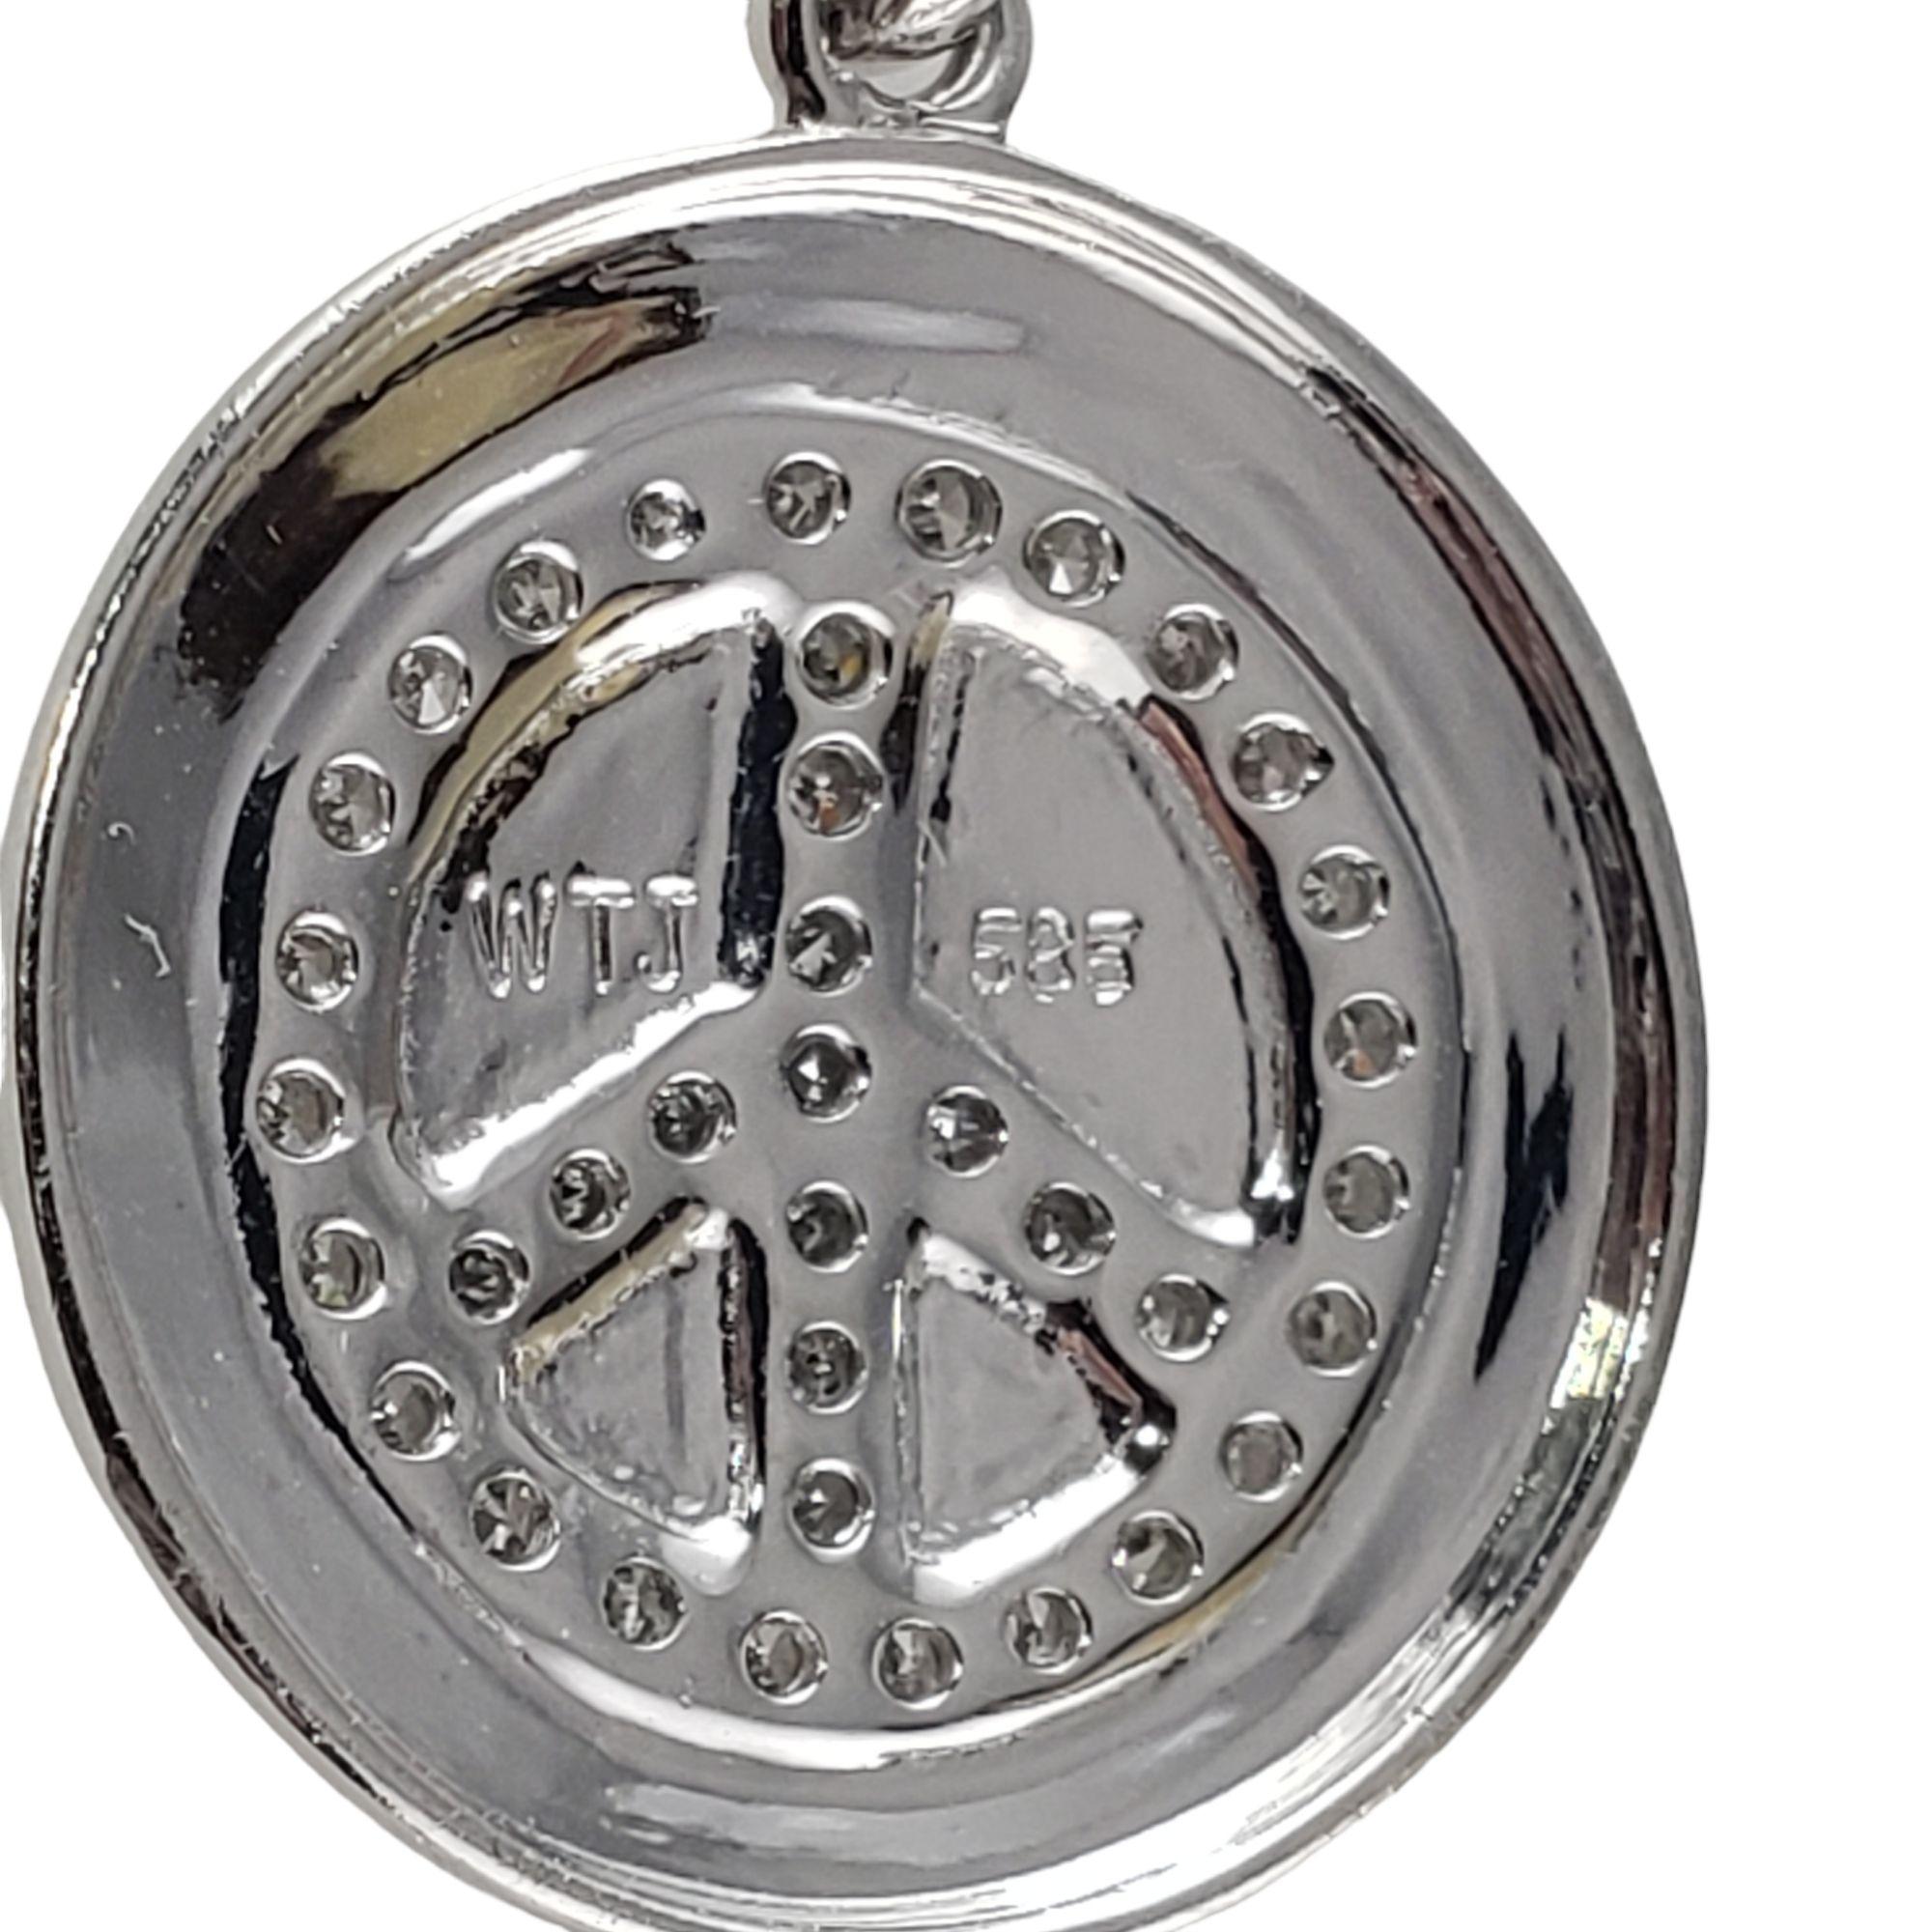 Vintage 14 Karat White Gold and Diamond Peace Pendant-

This lovely peace pendant features 37 round single cut diamonds set in beautifully detailed 14K white gold.

Approximate total diamond weight: .30 ct.

Diamond clarity: SI1

Diamond color: